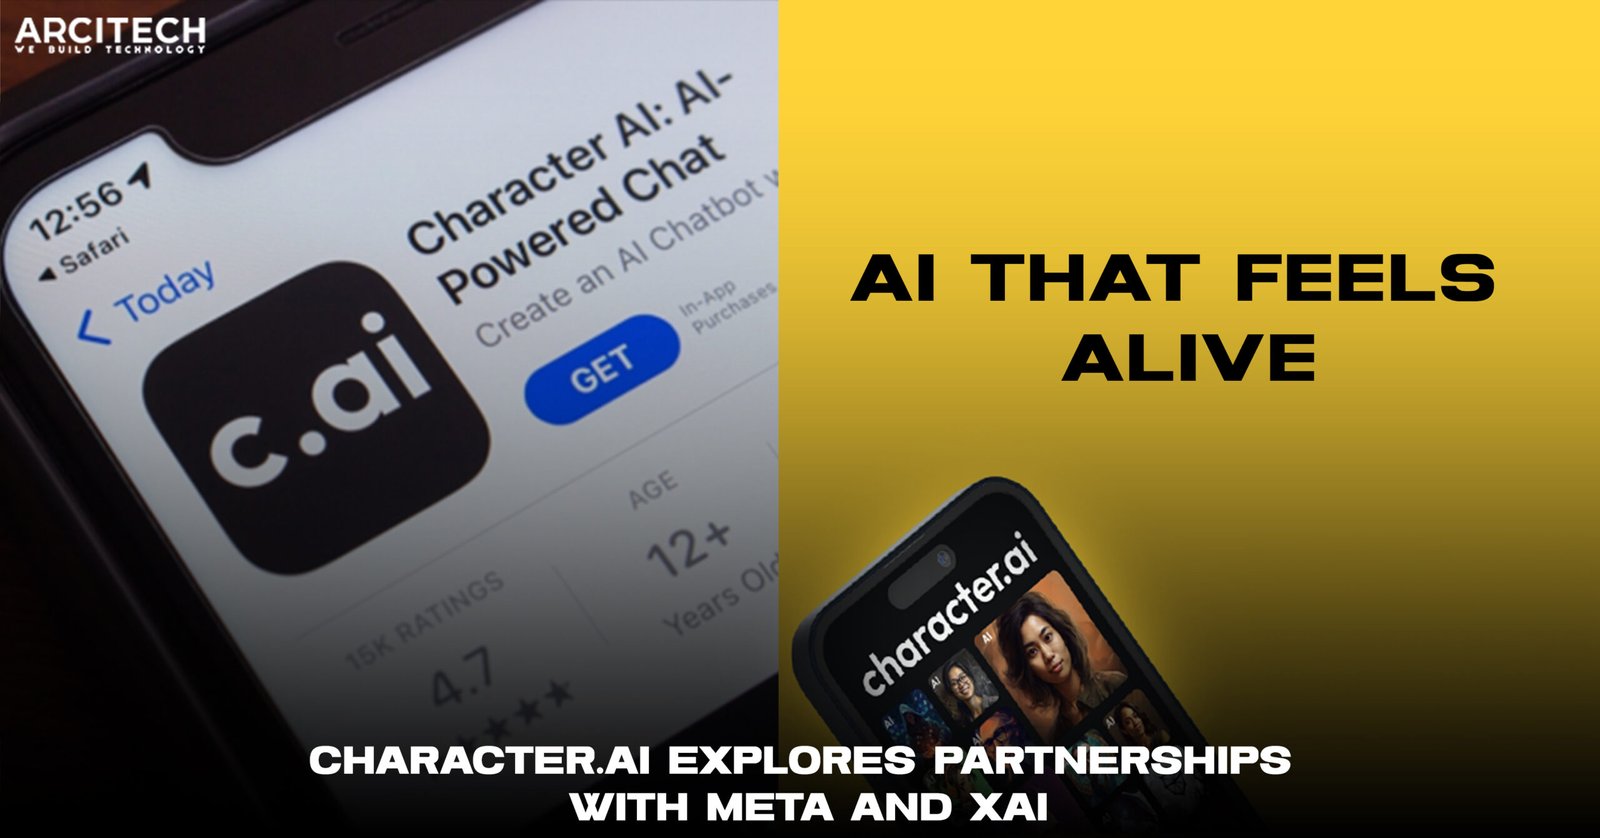 Character.ai app displayed on a smartphone screen, alongside the tagline 'AI that feels alive,' highlighting potential partnerships with Meta and xAI.